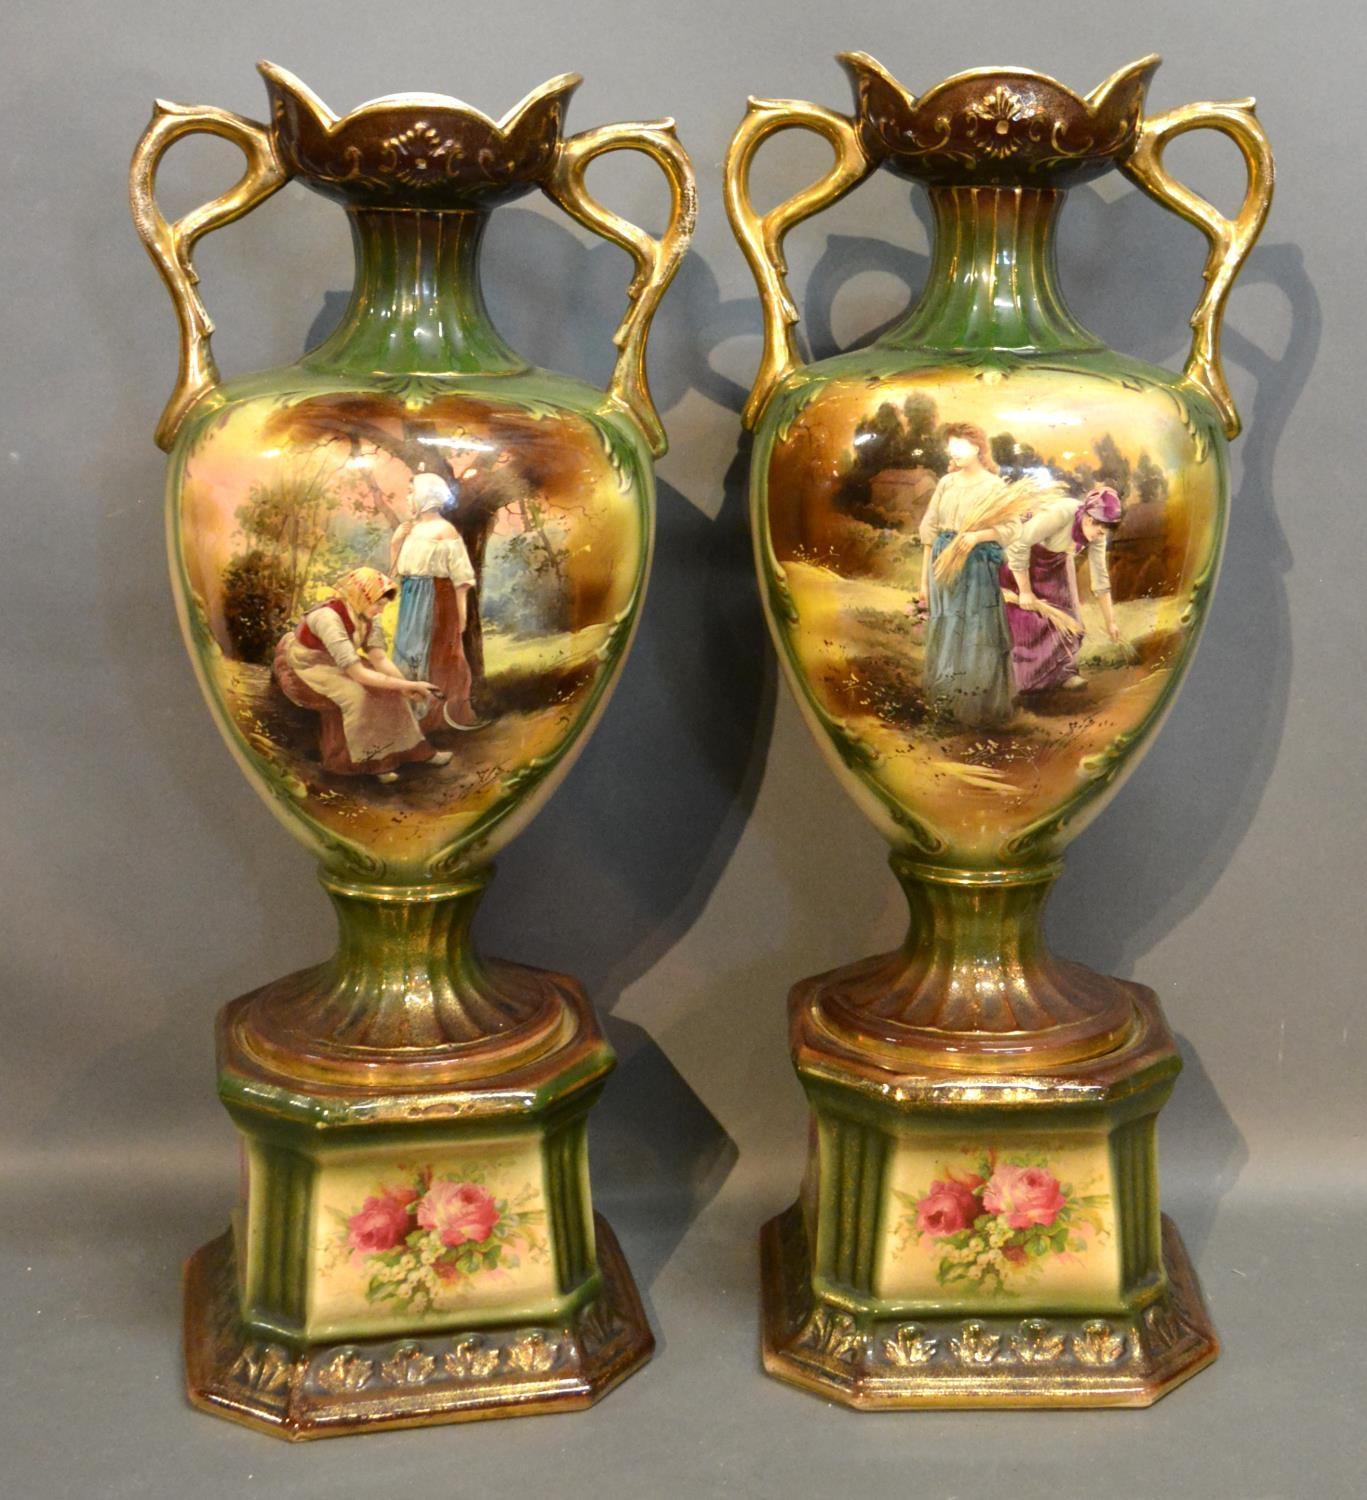 A Pair Of Victorian Two Handled Vases Decorated With Figures within landscapes highlighted with